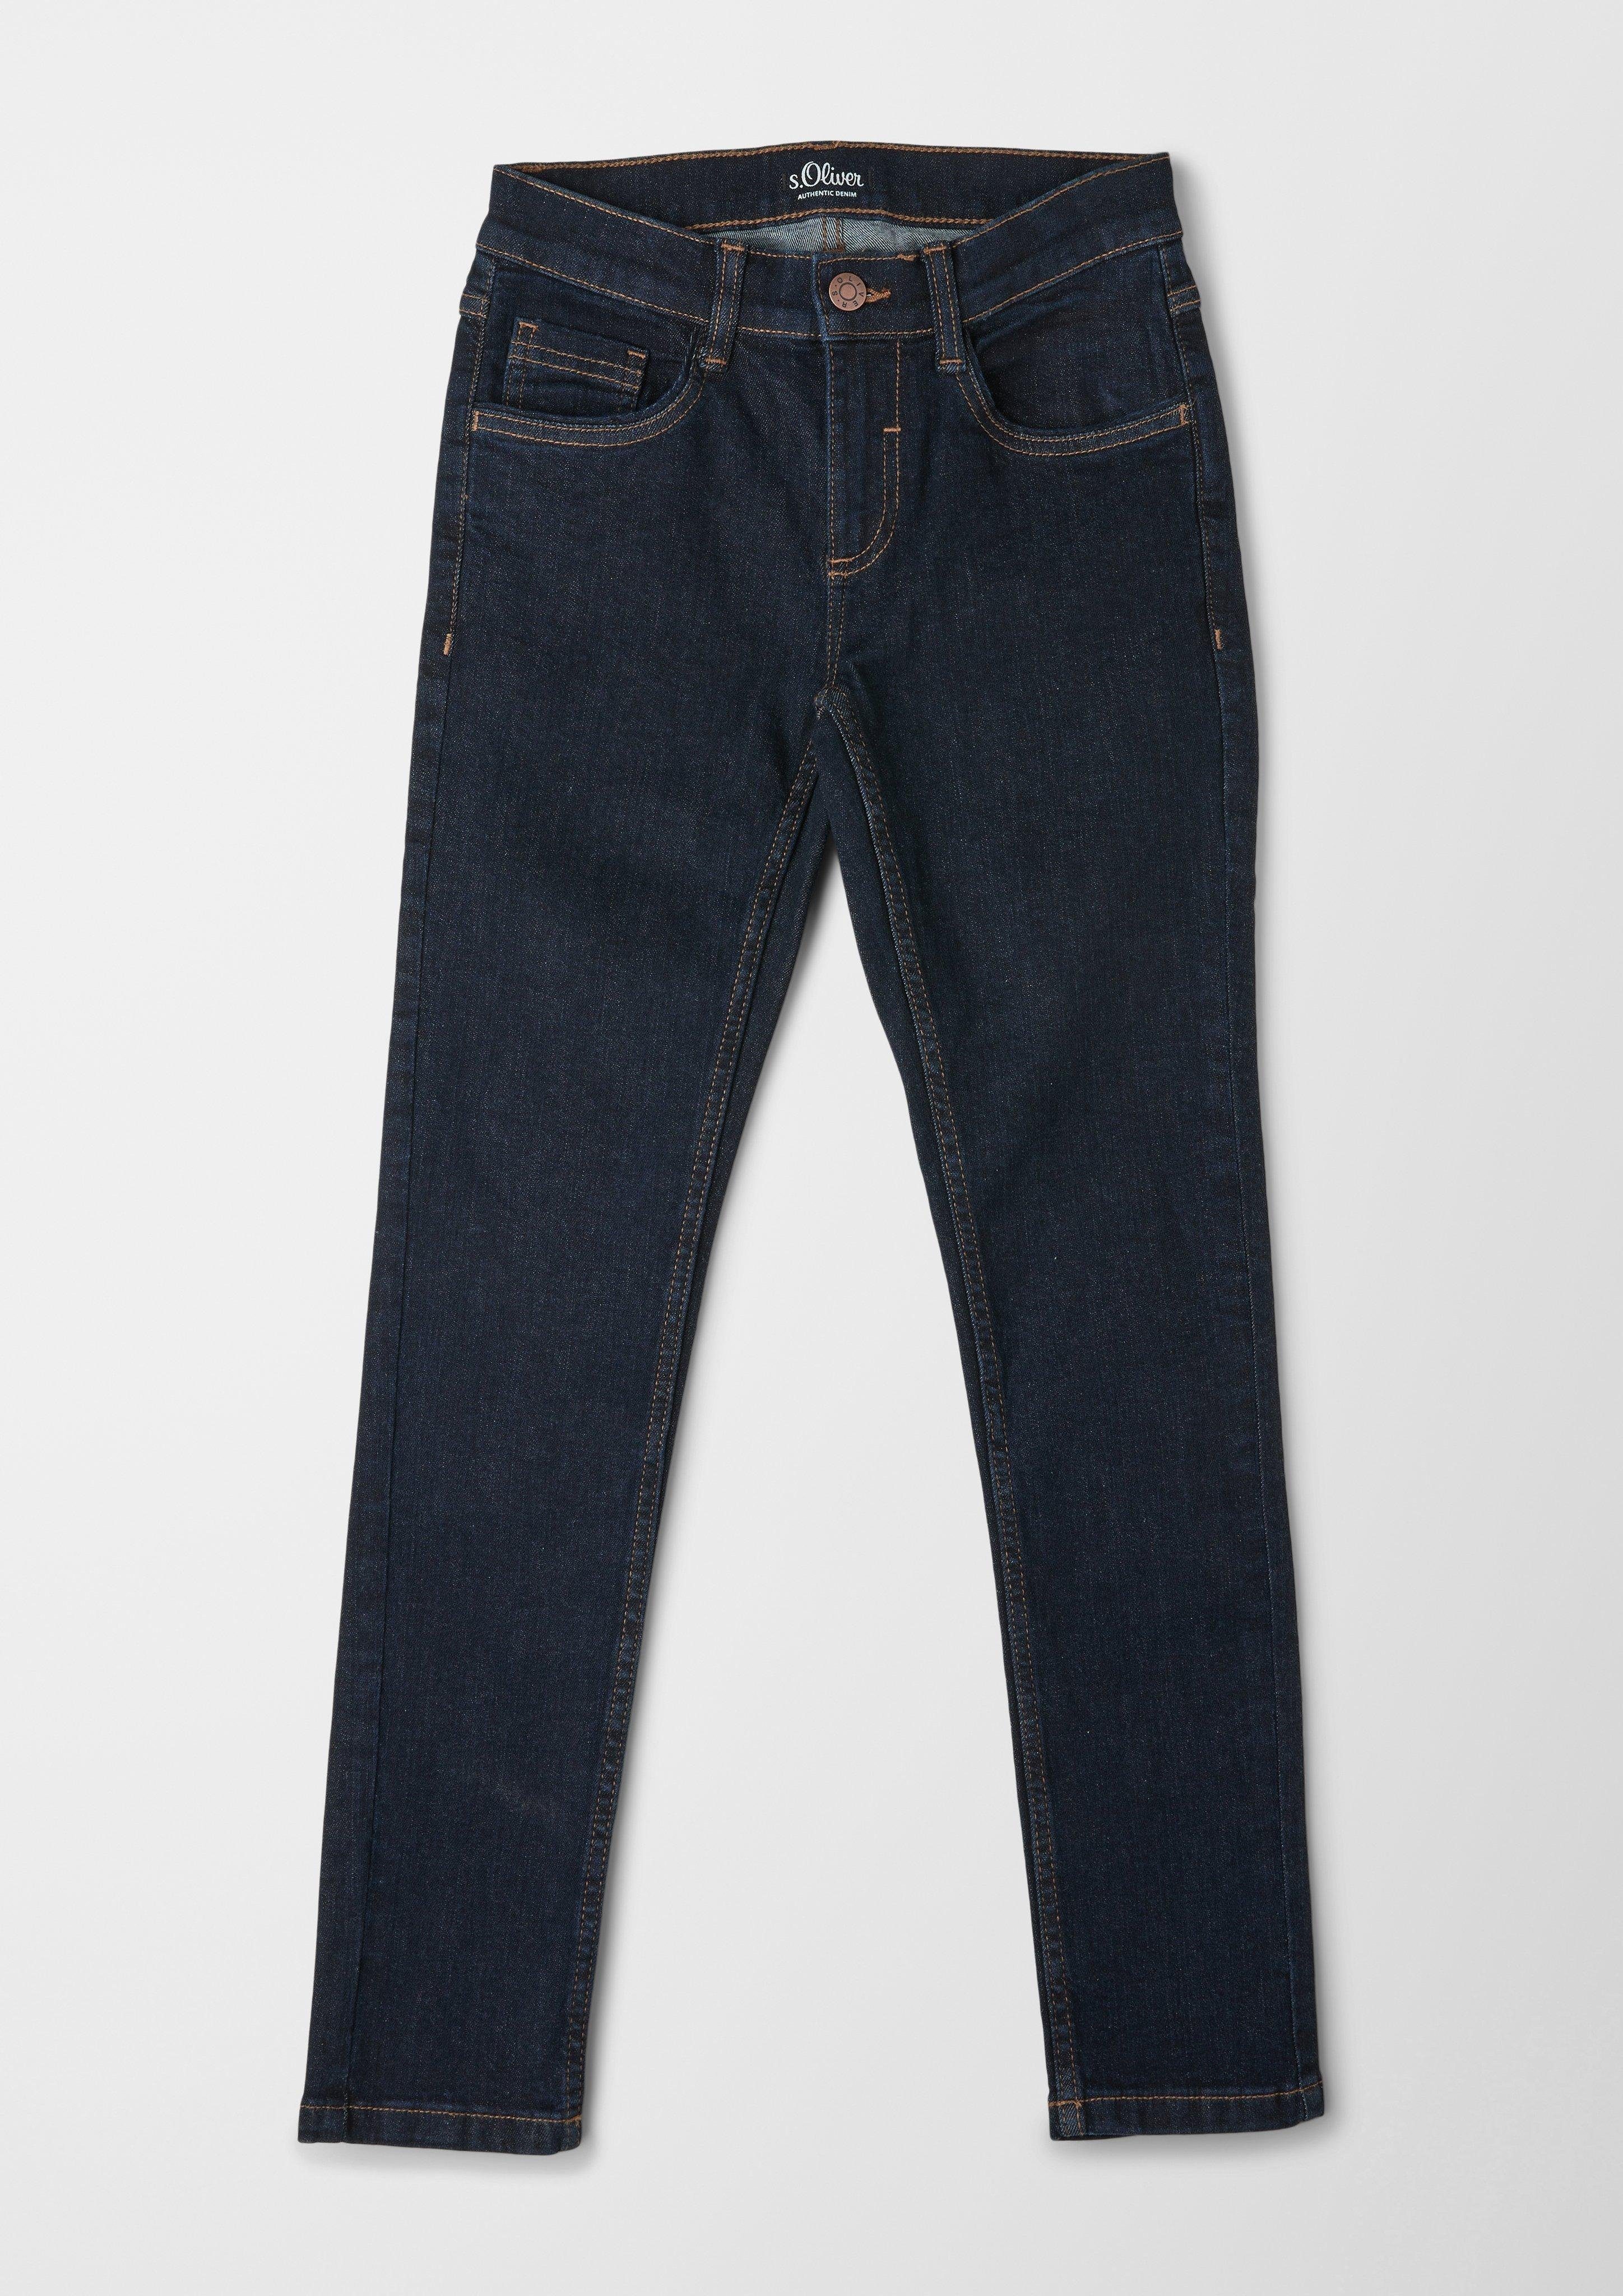 Slim Fit / Skinny / Leg Waschung Skinny Seattle 5-Pocket-Jeans Jeans Rise / Mid s.Oliver